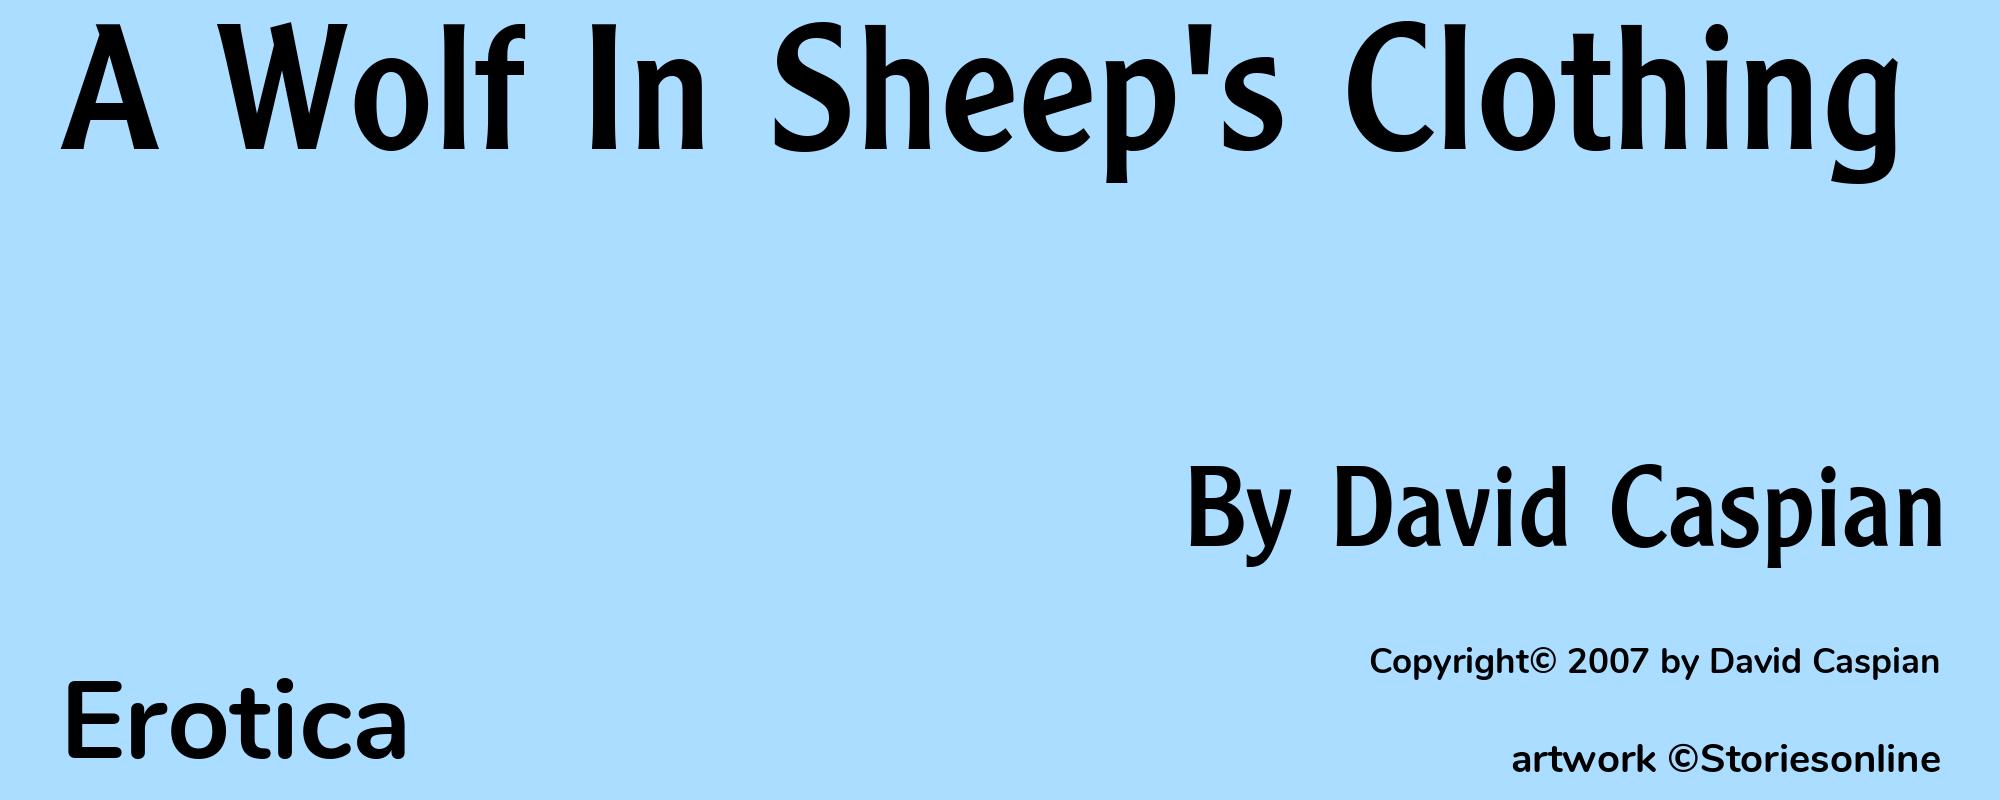 A Wolf In Sheep's Clothing - Cover